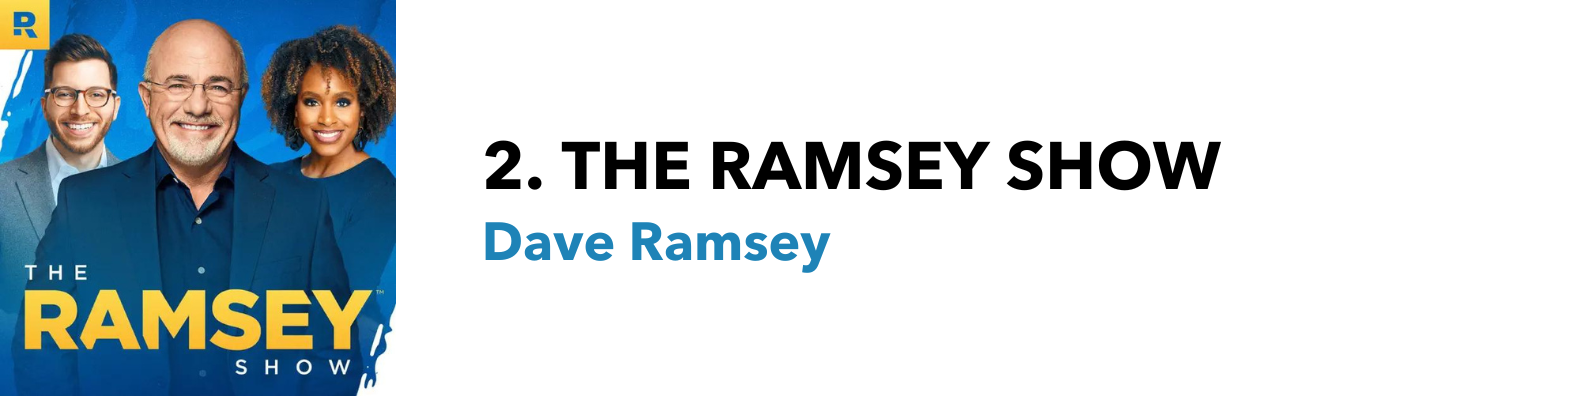 <a href="https://podcasts.apple.com/us/podcast/the-ramsey-show/id77001367">Listen on Apple Podcasts</a>